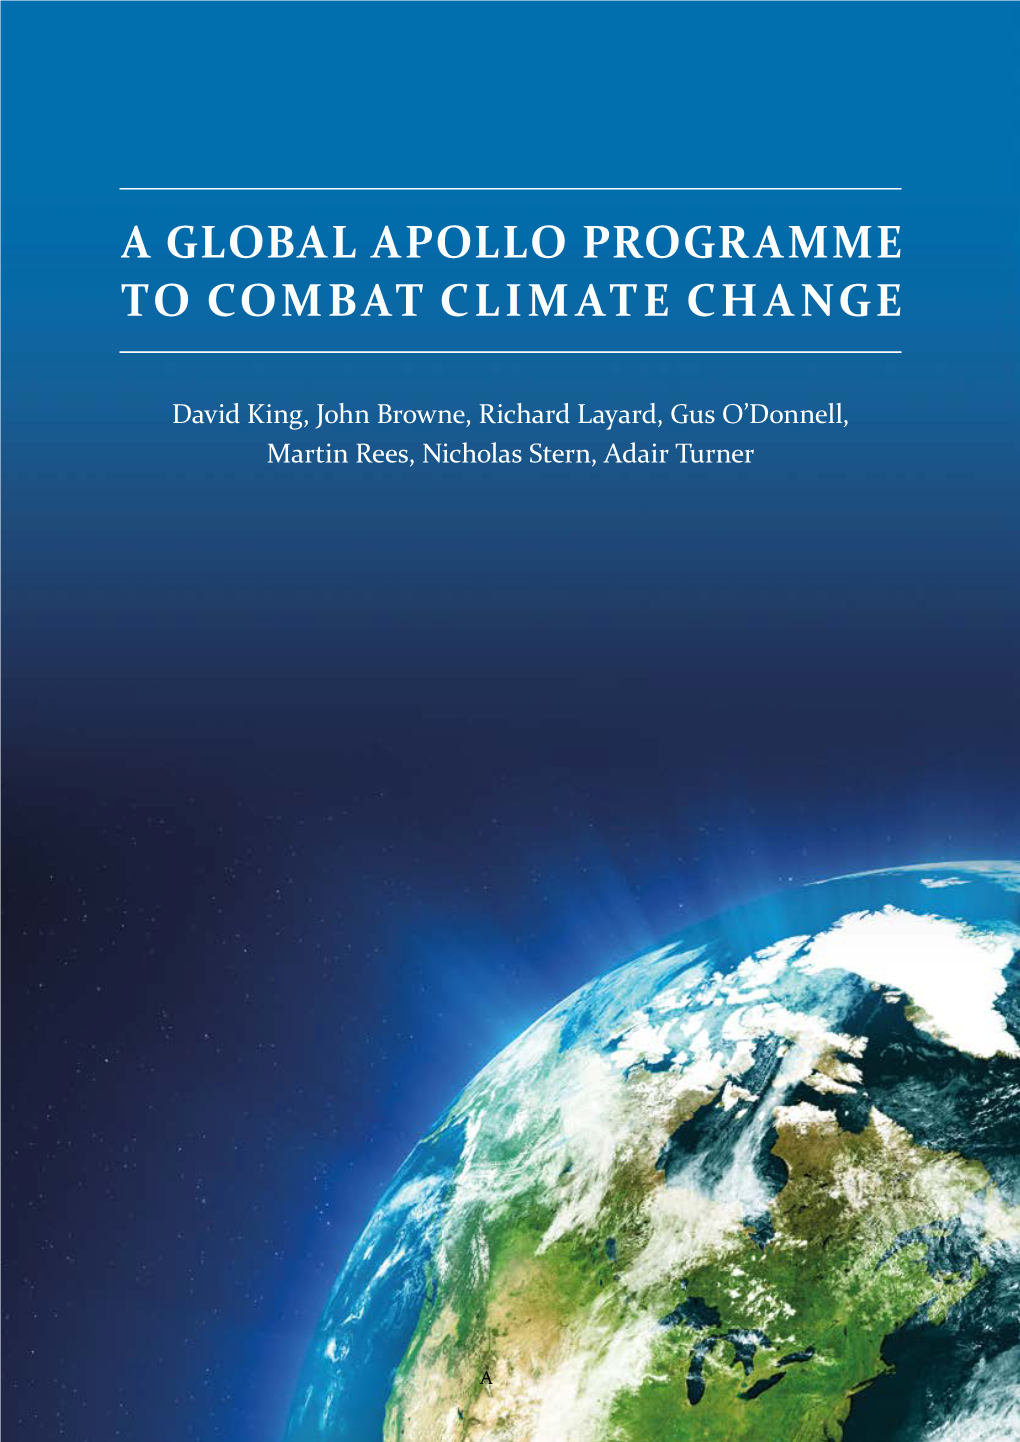 A Global Apollo Programme to Combat Climate Change